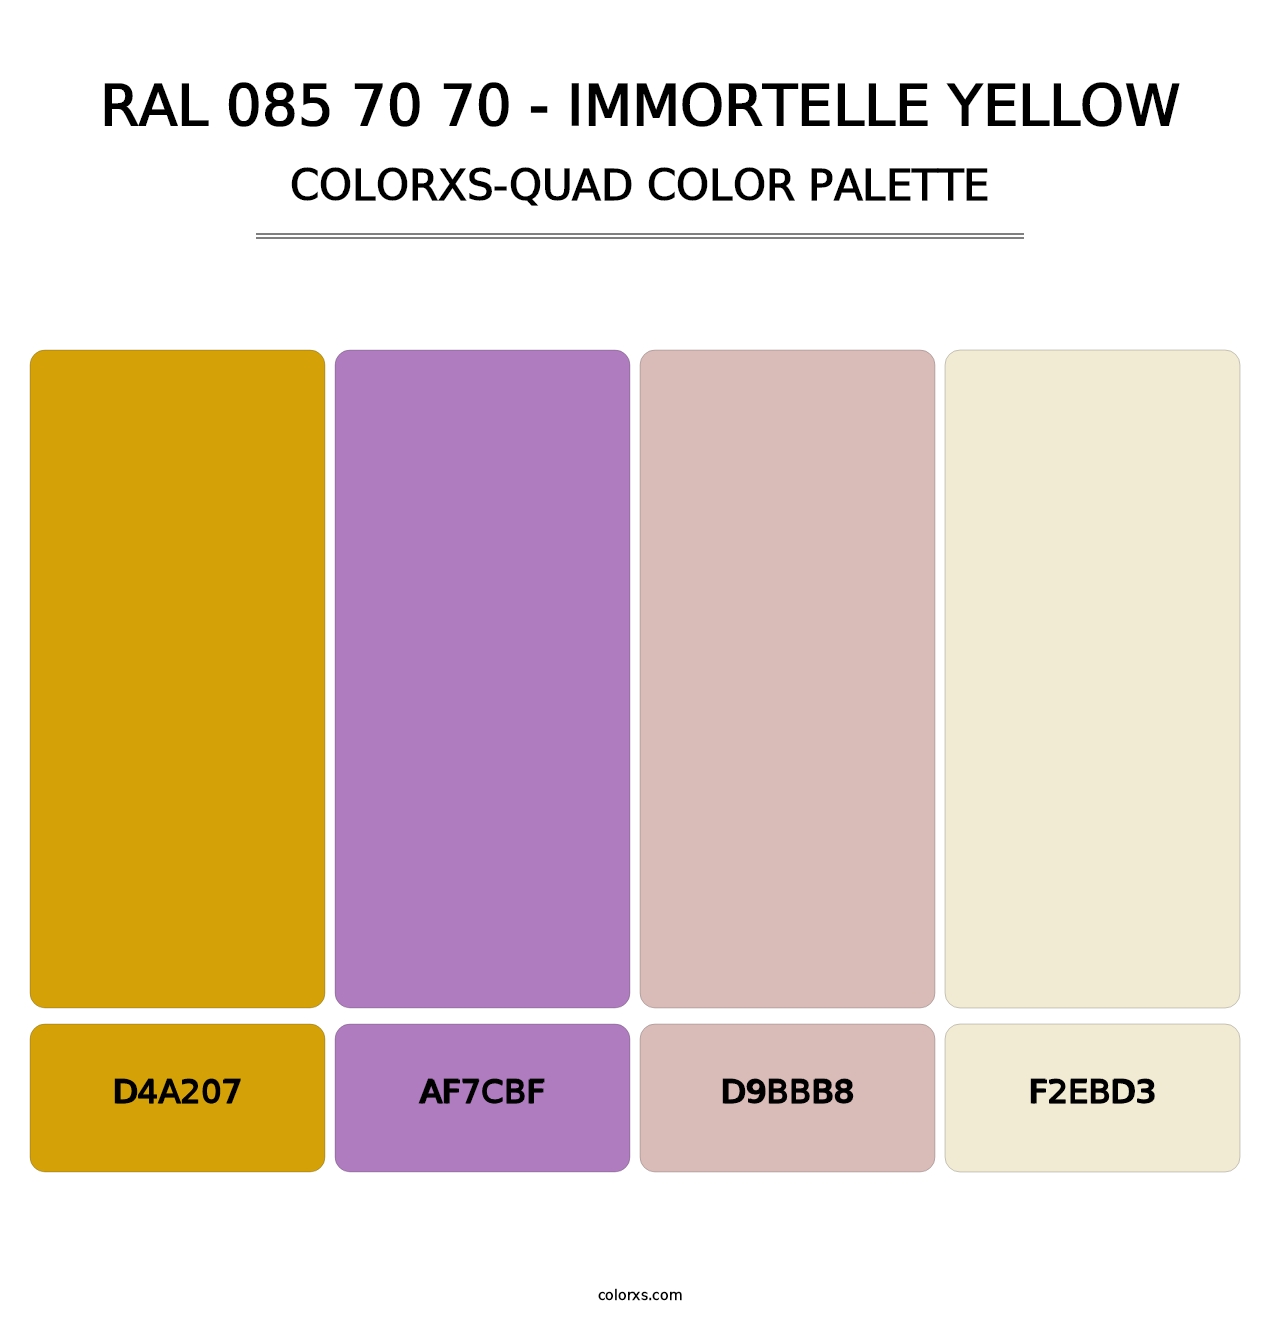 RAL 085 70 70 - Immortelle Yellow - Colorxs Quad Palette